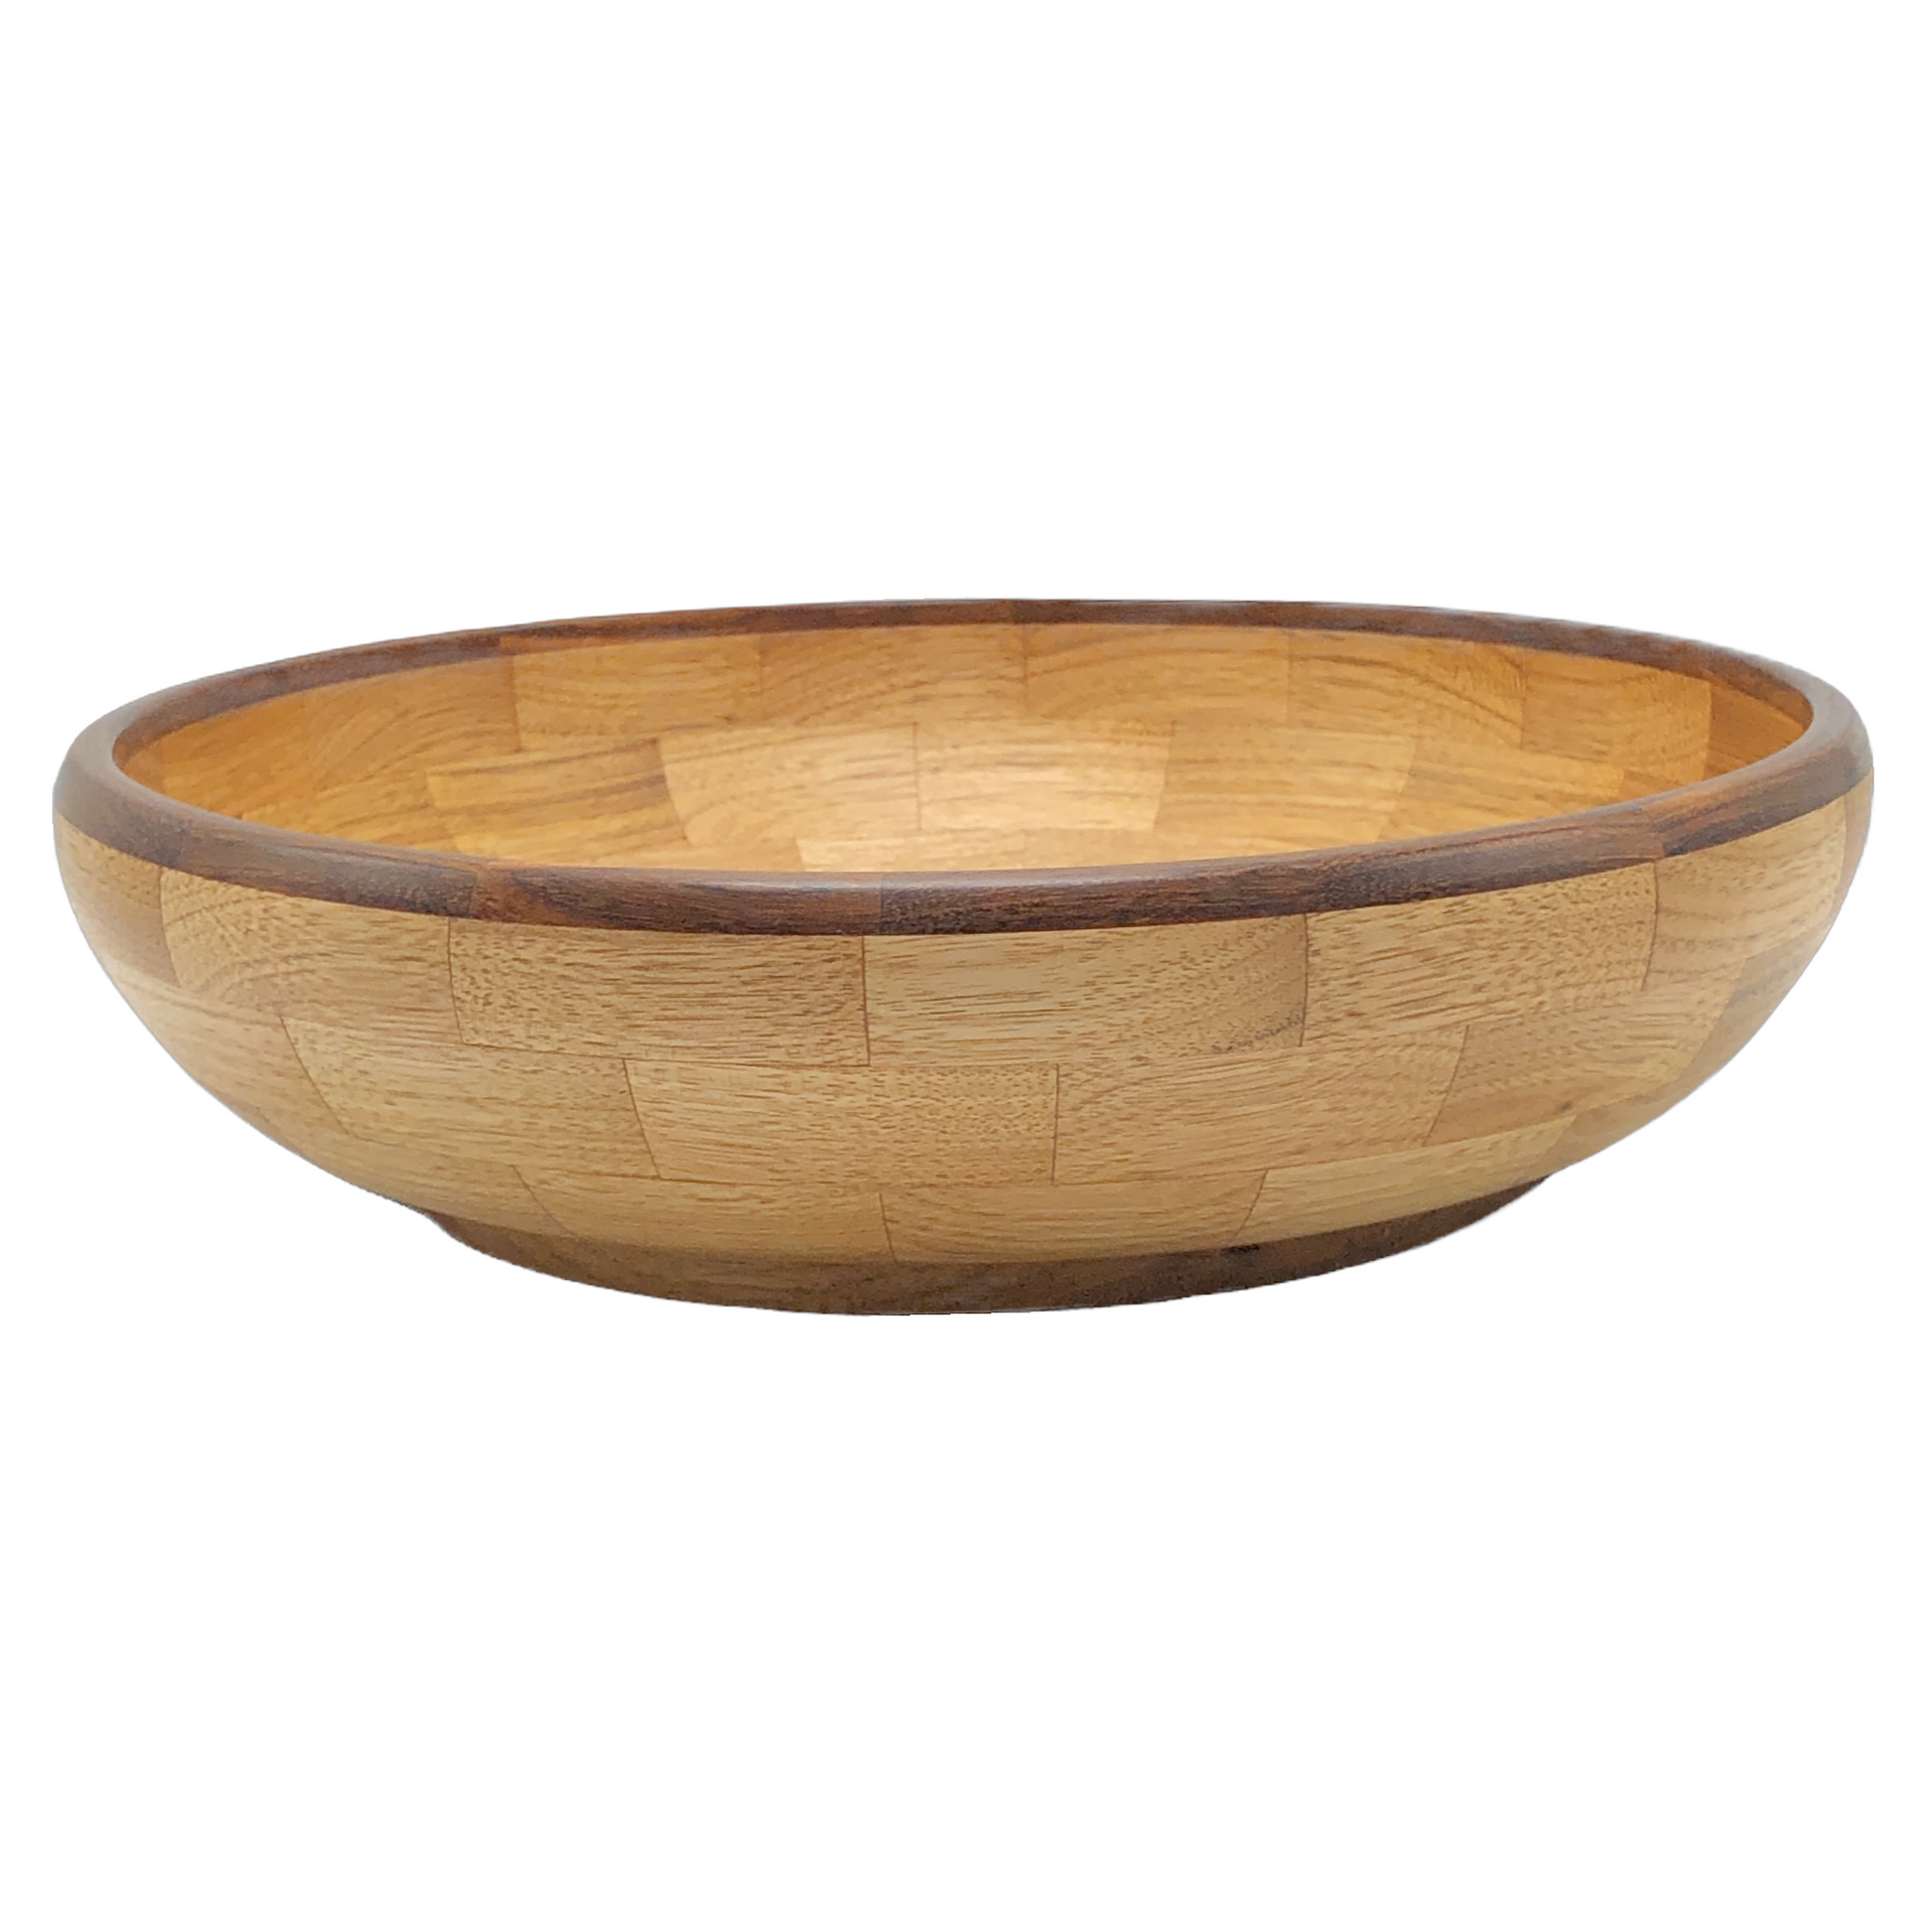 Butternut wood bowl with goncolo wood rim, fruit bowl, catch-all or display piece, made in northern Michigan, Hanni Gallery, Harbor Springs